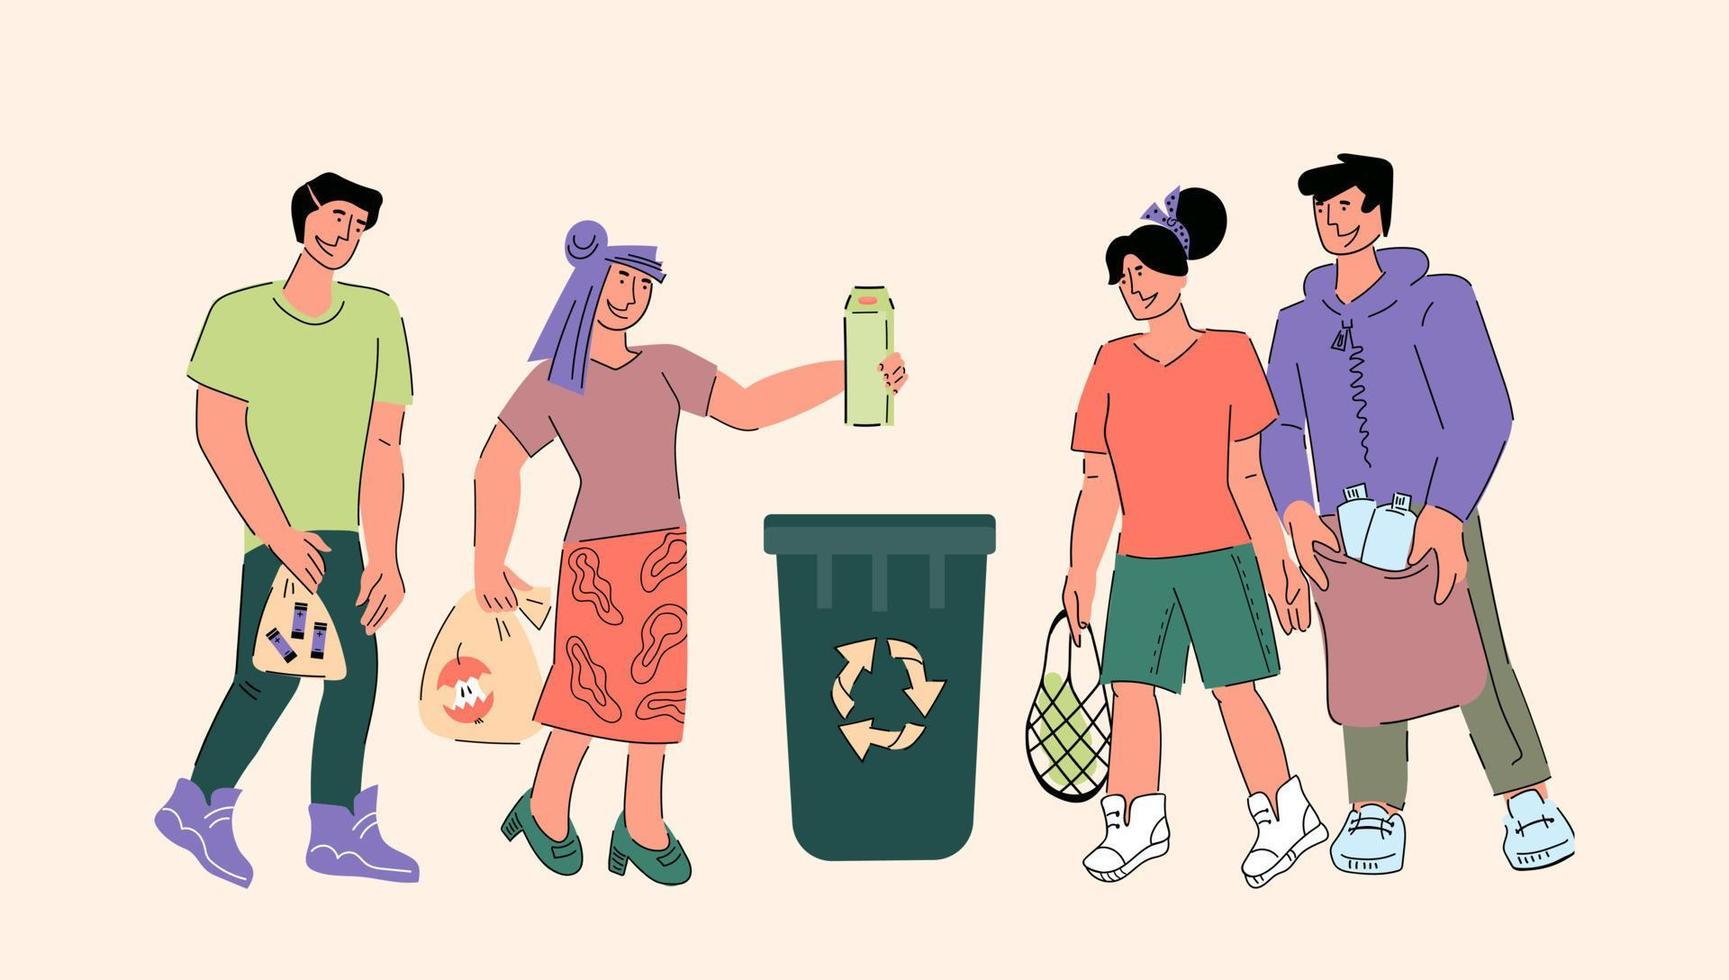 Ecological waste sorting and recycling banner with people characters, sketch cartoon vector illustration. Trash bin for plastic, glass and organic garbage. Environment and nature conservation.